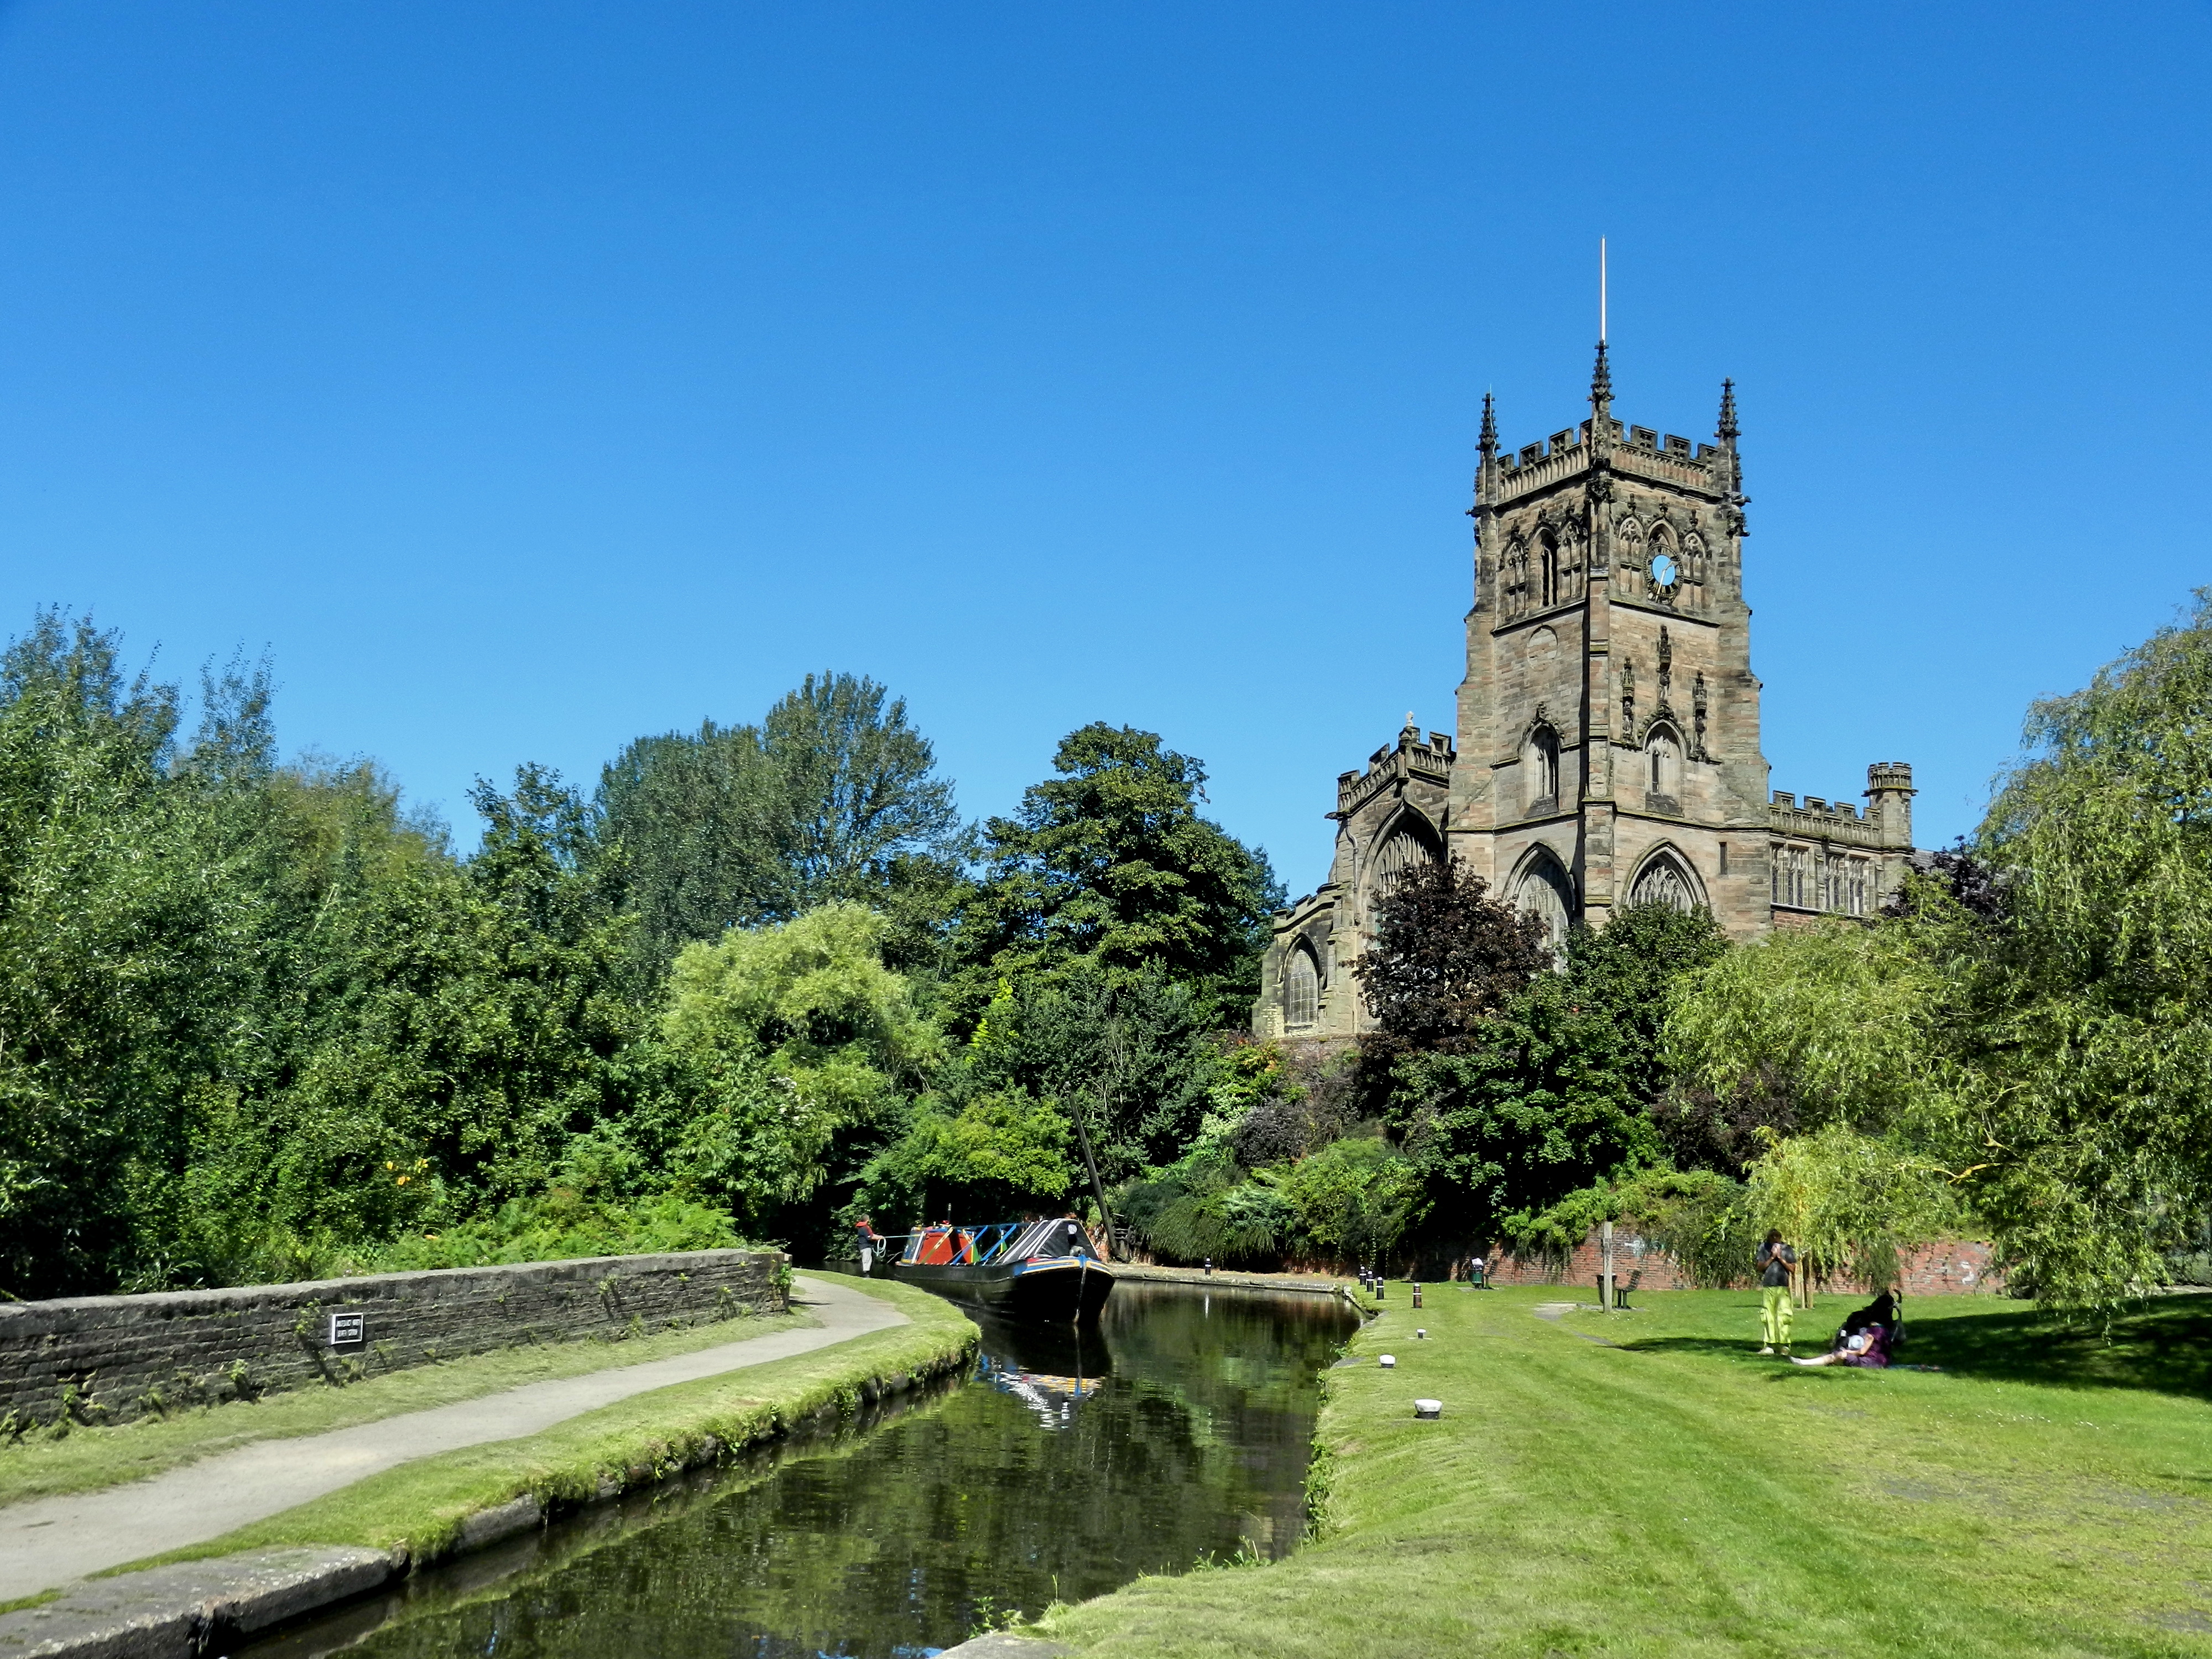 St Mary's and All Saints Parish Church, seen from the Staffordshire and Worcestershire Canal. Tanya Dedyukhina, CC BY 3.0 <https://creativecommons.org/licenses/by/3.0>